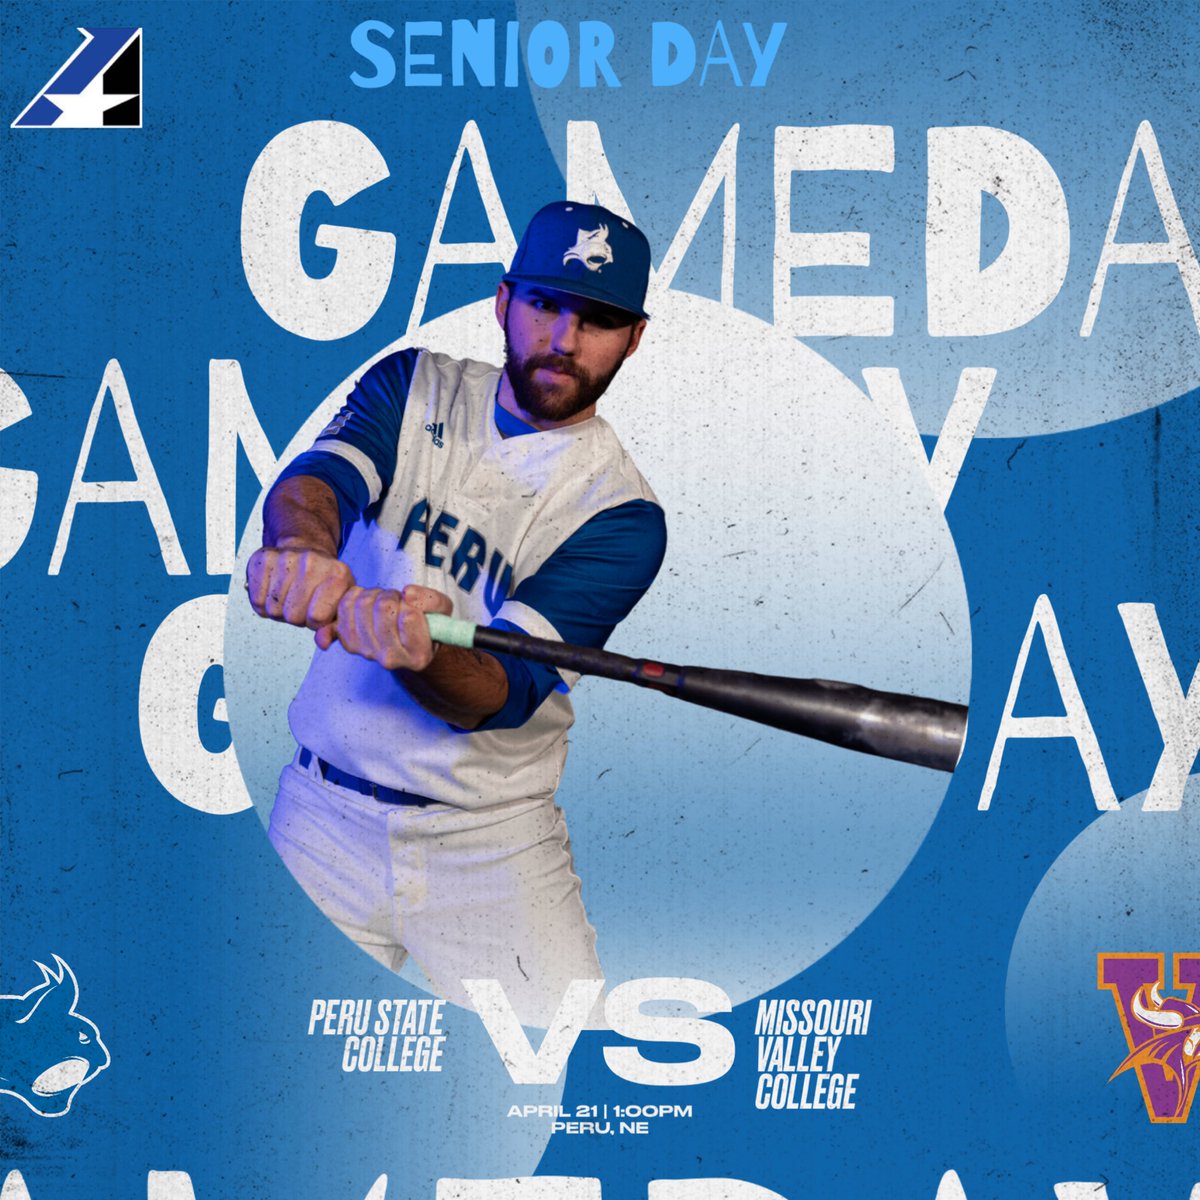 📣GAMEDAY📣 ‼️SENIOR DAY‼️ Back at it on a Sunday as the Bobcats look to close out the series with MoValley on a high note. Come join us as we send off our seniors with a bang as they take the field one last time in Bobcat Blue at Centennial Park!